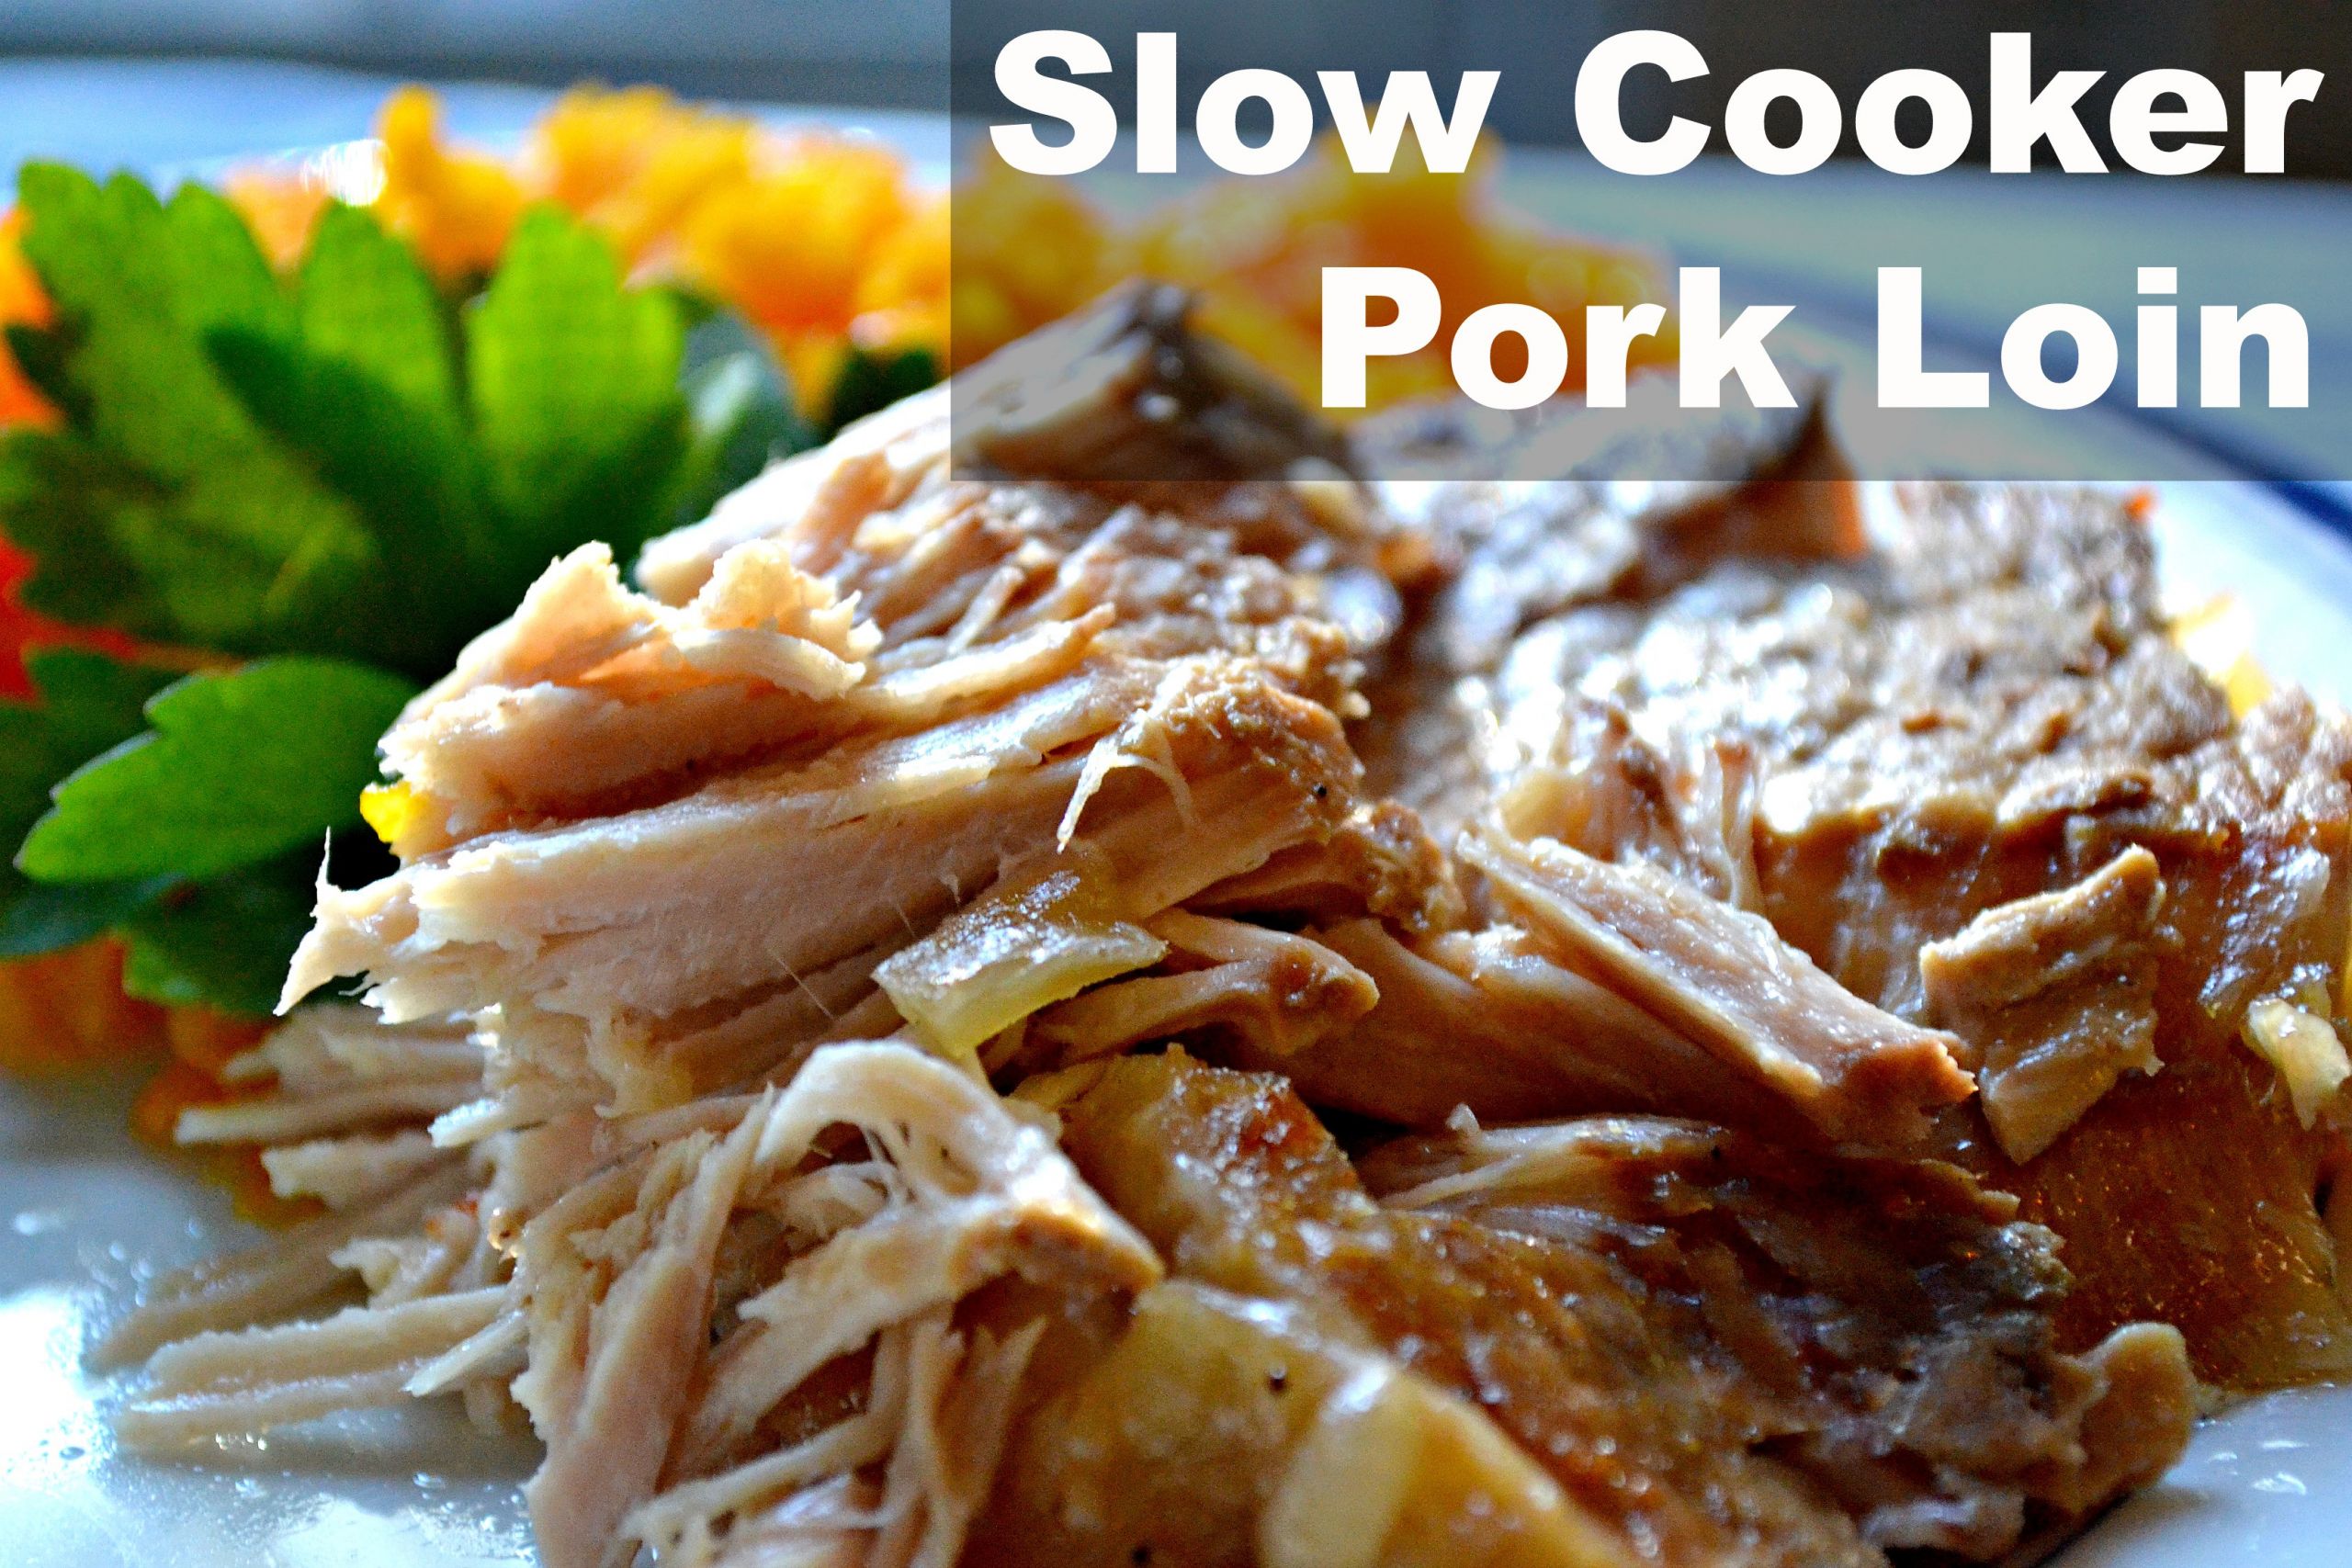 Slow Cook Pork Loin In Oven
 Two Slow Cooker Pork Loin Recipes Blissfully Domestic